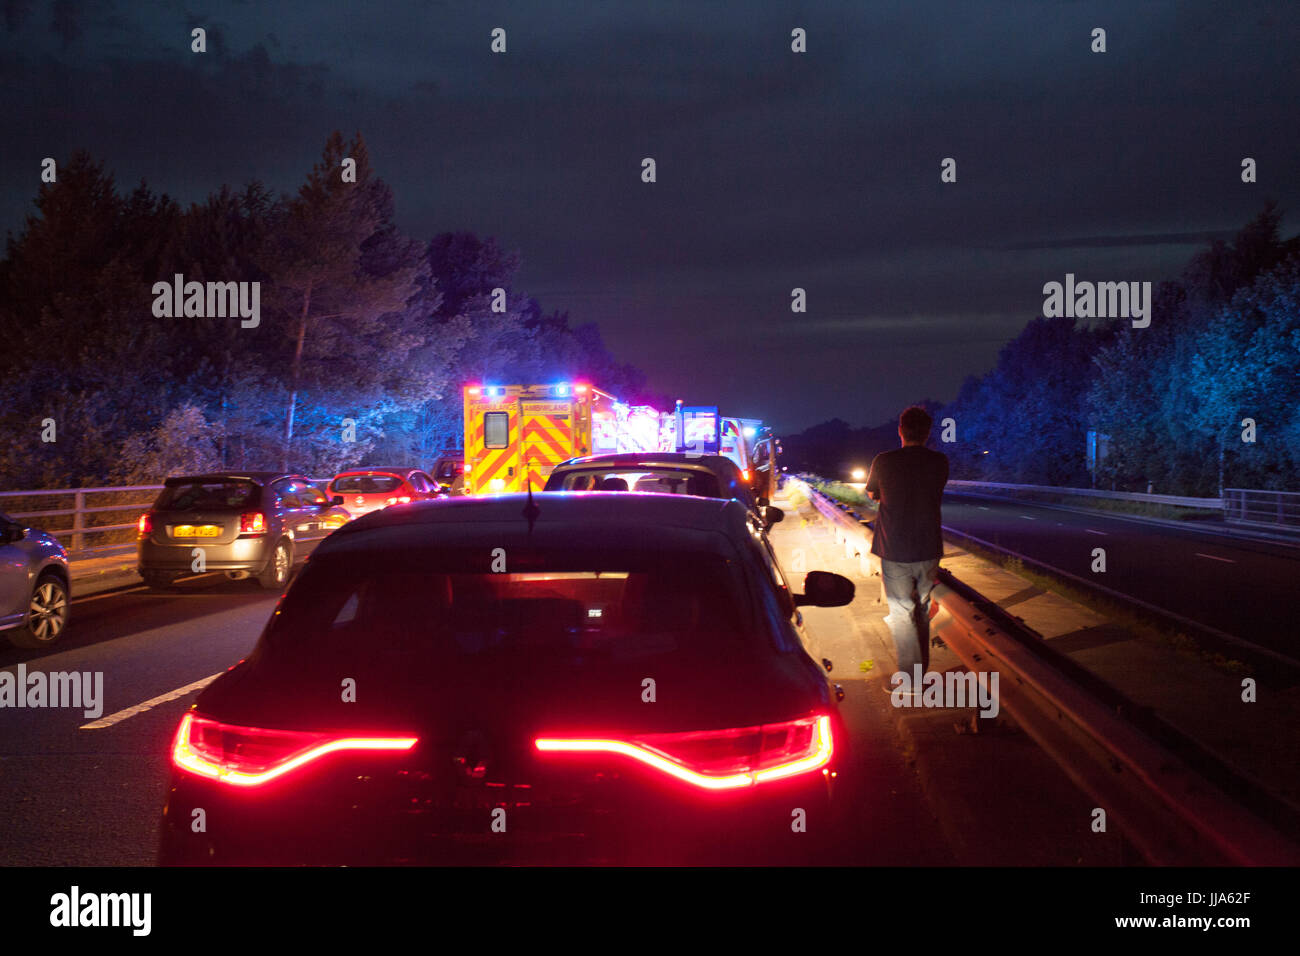 Flintshire, North, UK. 18th July, 2017. UK Weather. A serious road traffic accident this evening at Dobshill Interchange Emgergency Services at the Scene treating injured and Accident Investigation on Scene. Road clear of traffic by reversing off A55 into Dobshill down slip road. Credit: DGDImages/Alamy Live News Stock Photo